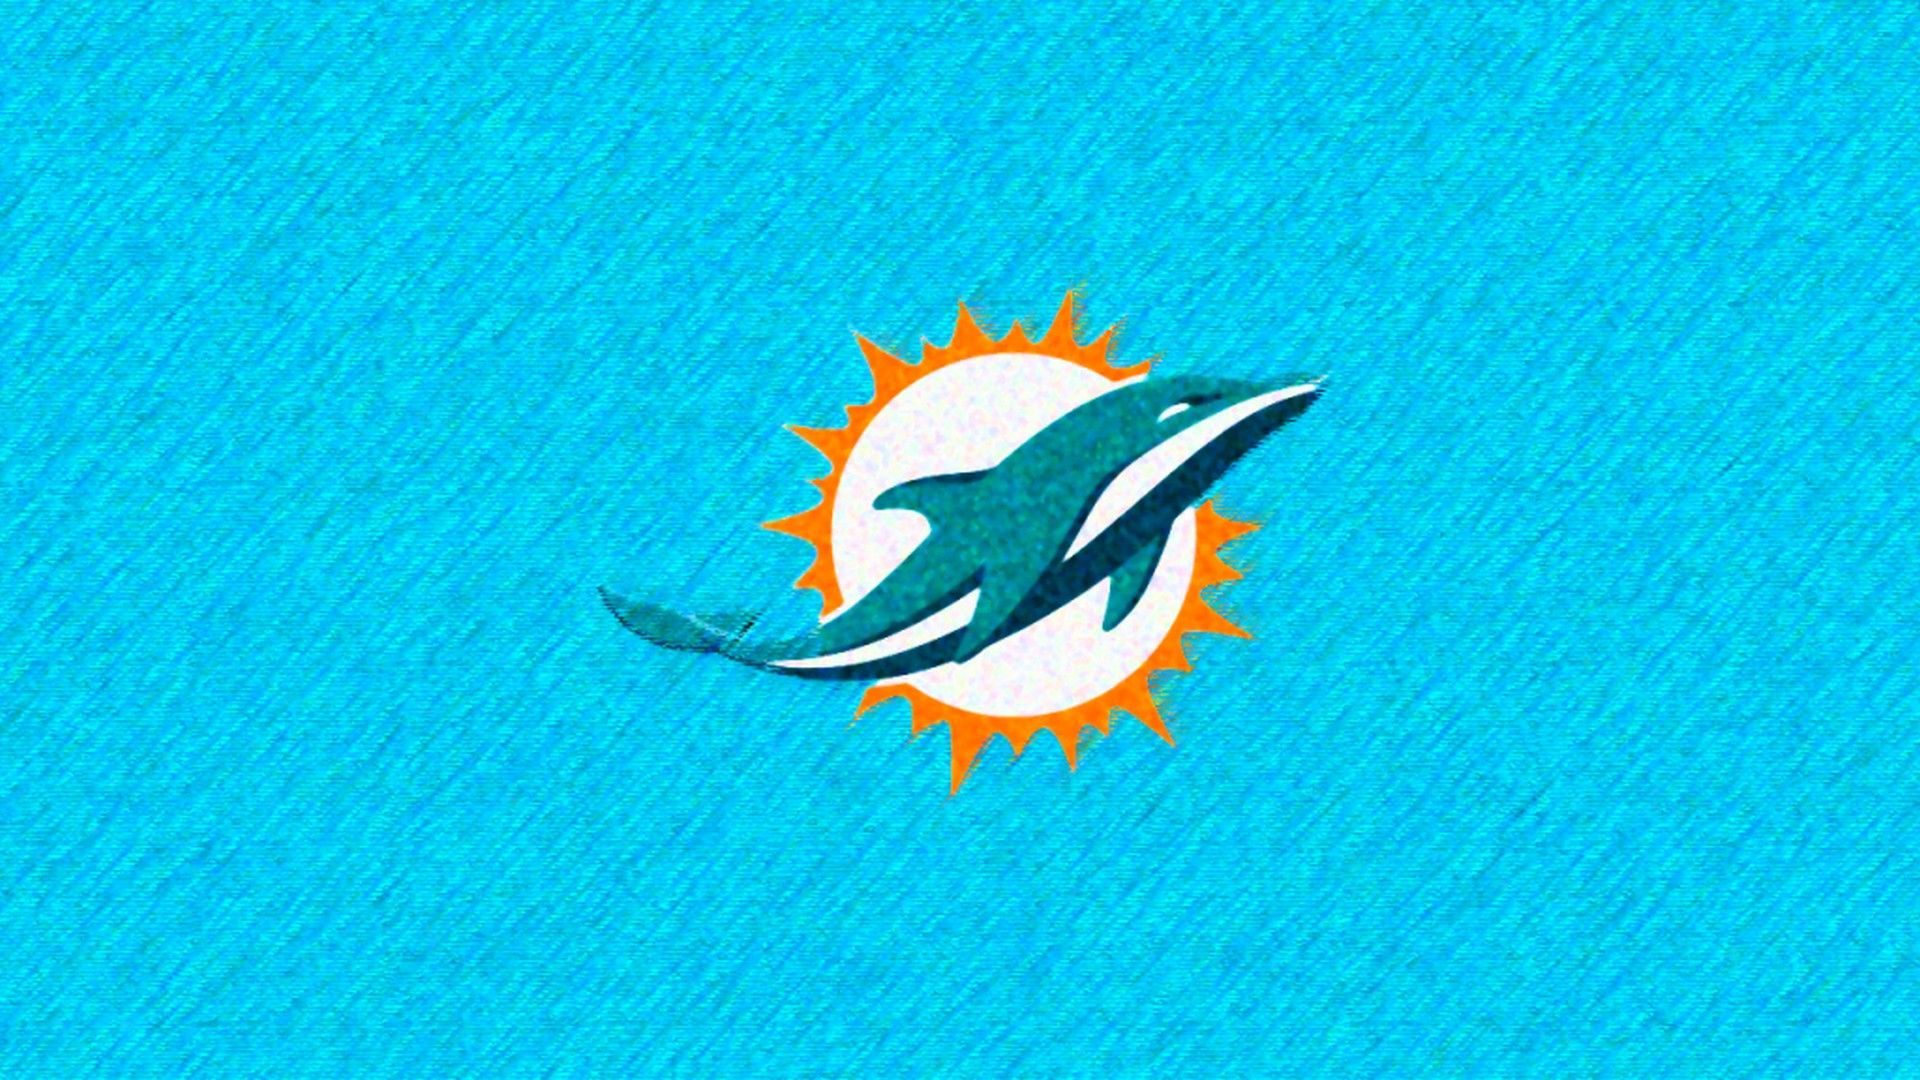 HD Miami Dolphins Background NFL Football Wallpaper